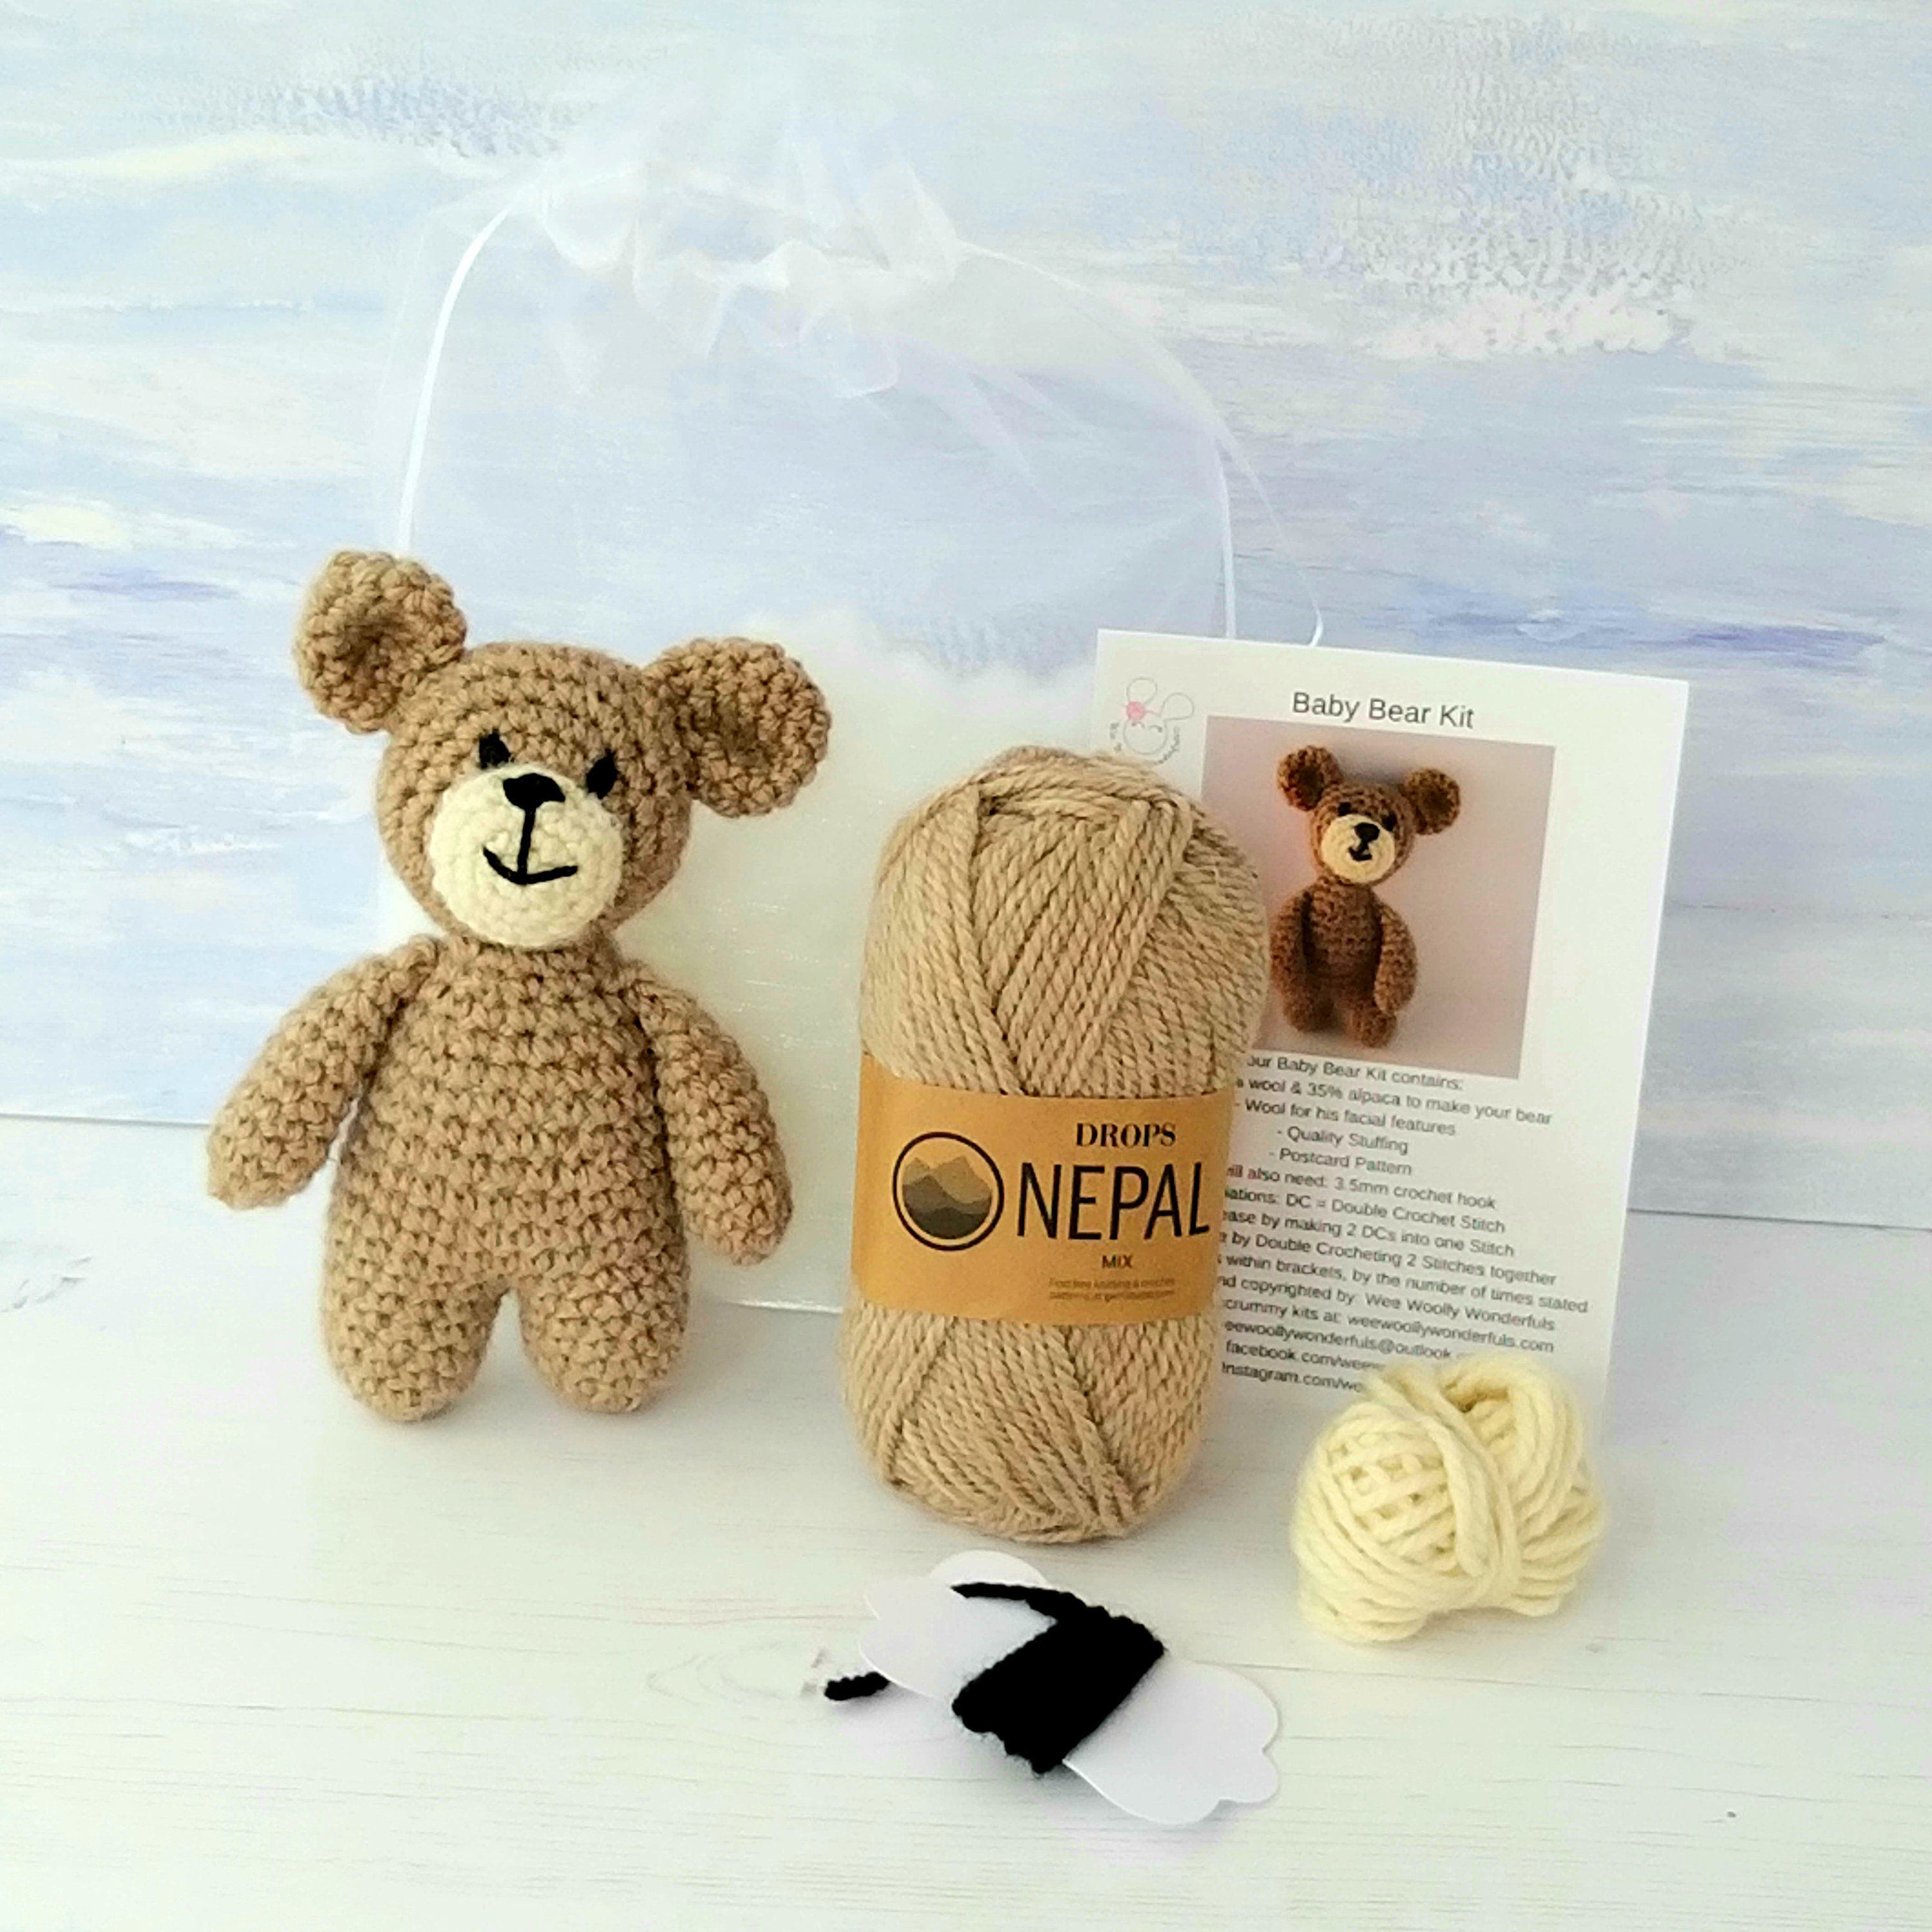 Piccassio Crochet Kit for Beginners Adults and Kids - Make Amigurumi and Crocheting Kit Projects - Beginner Crochet Kit Includes 20 Colors Crochet